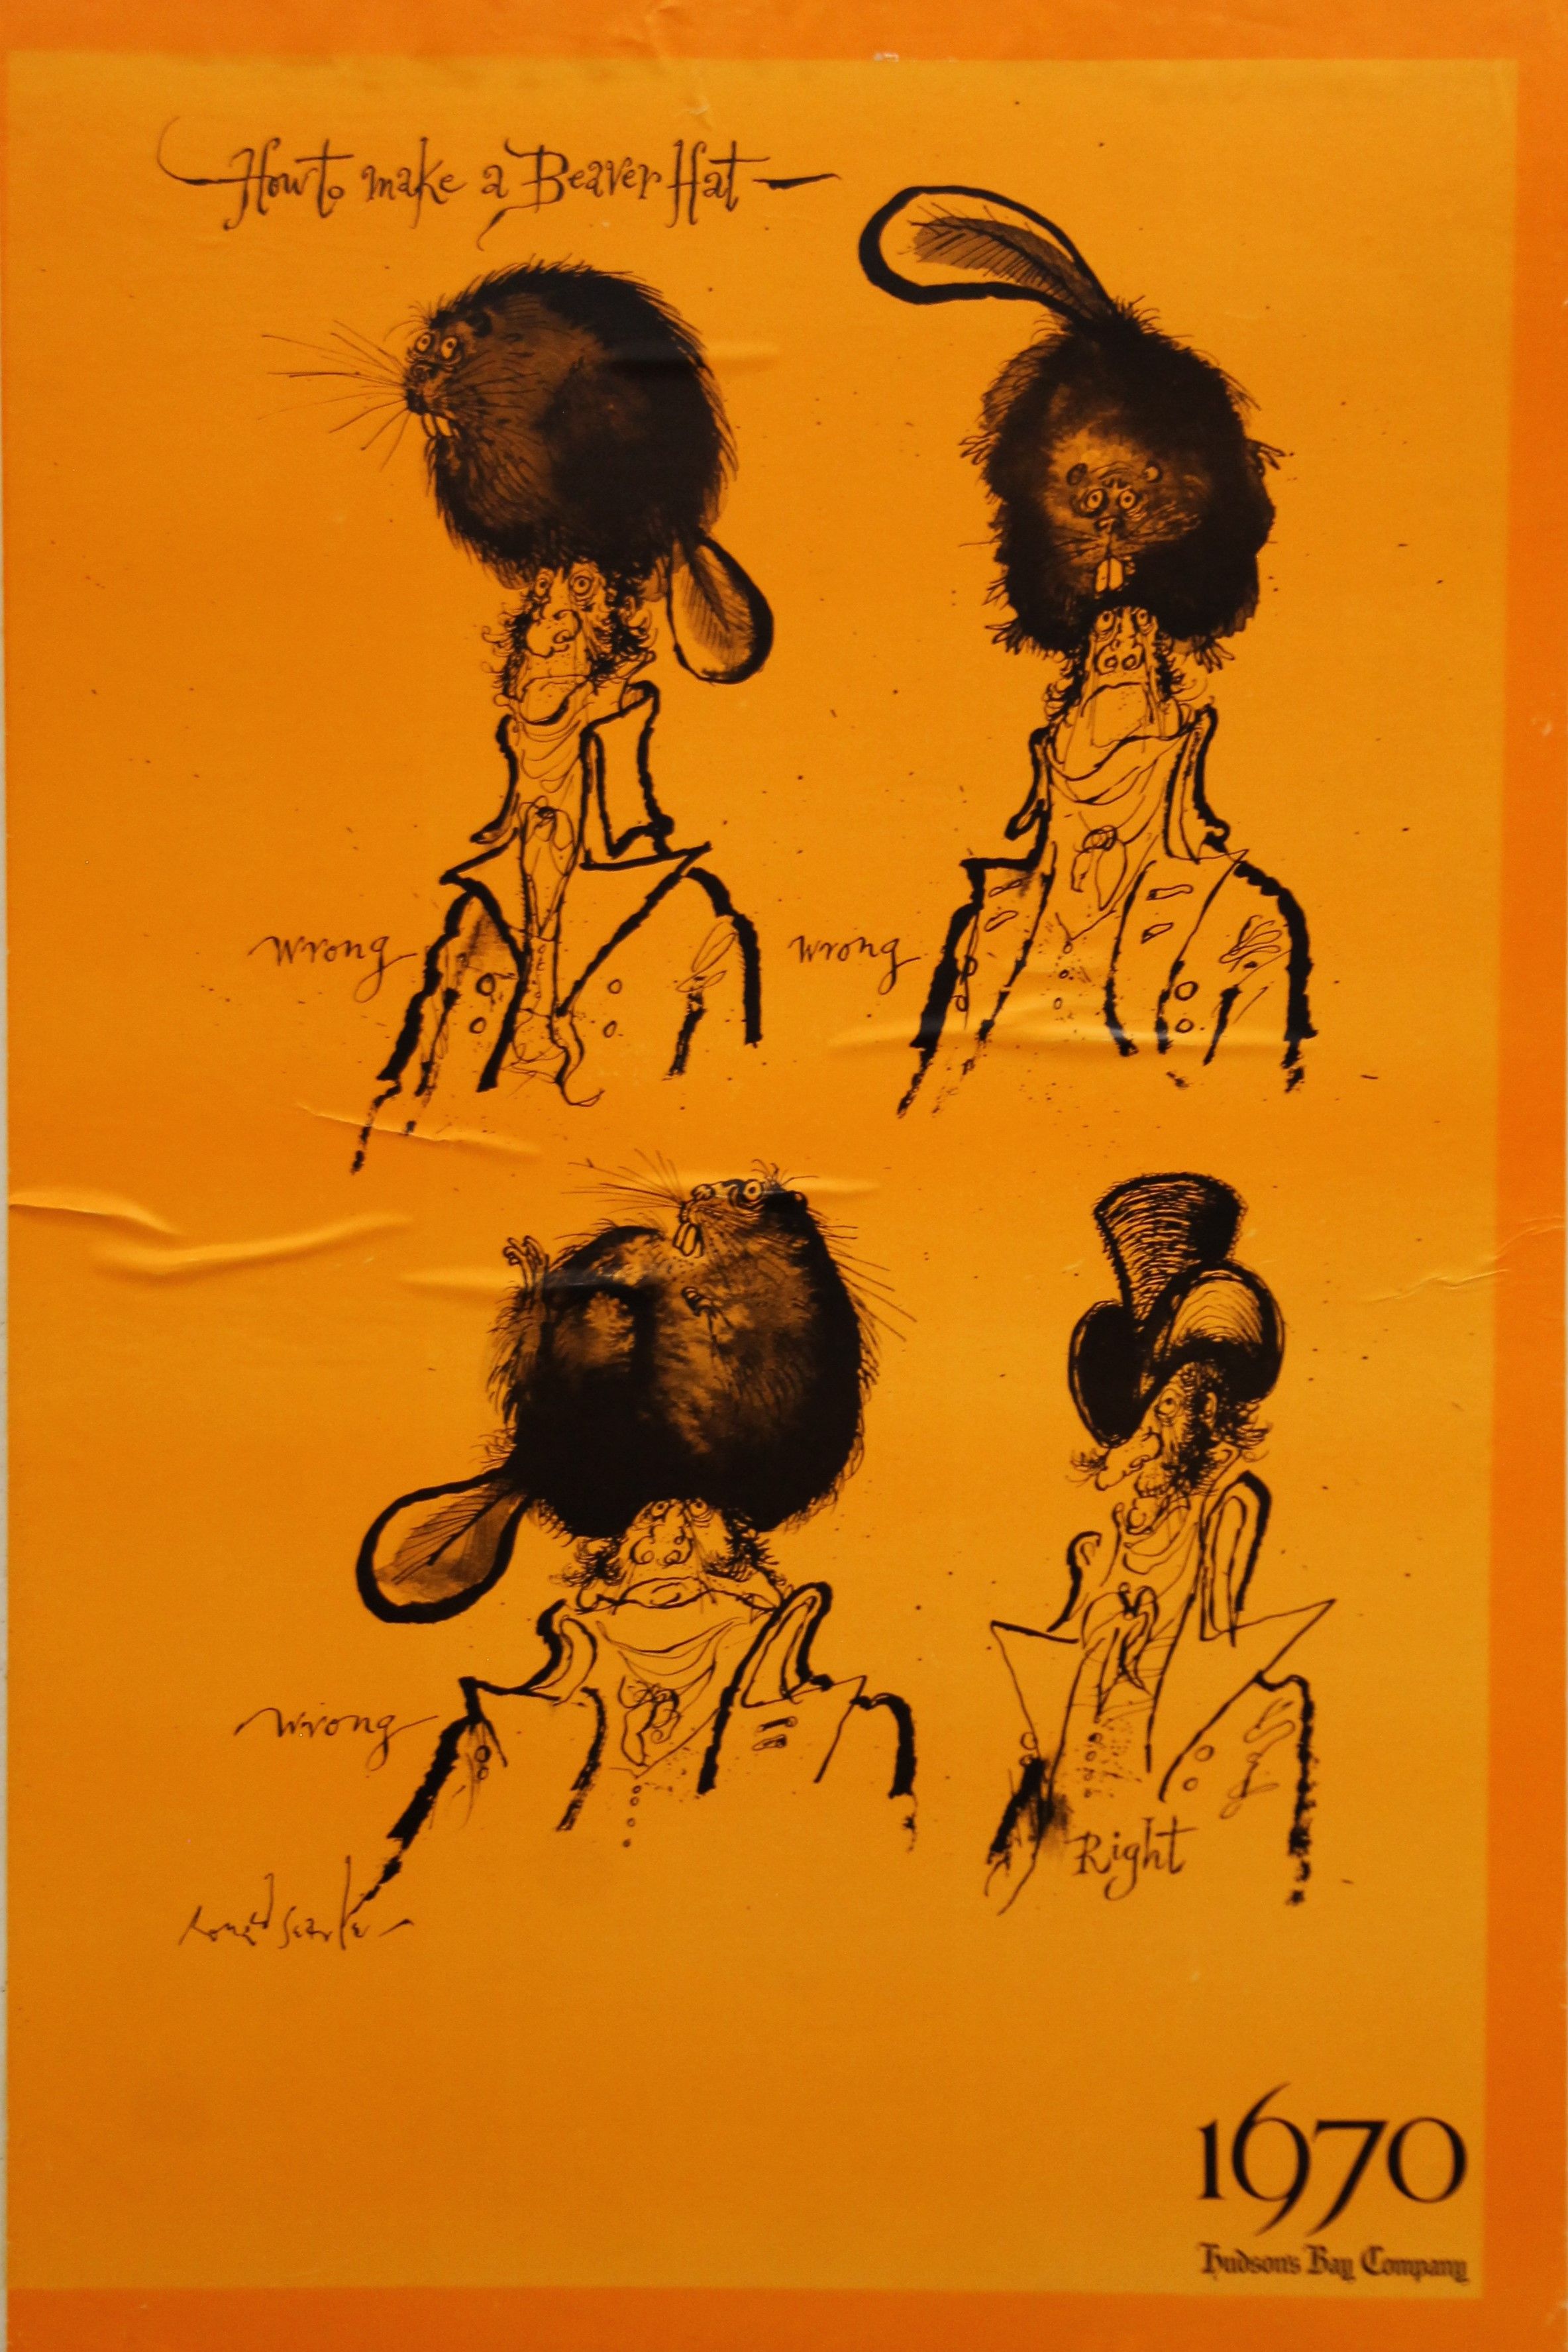 A 1970 Hudson Bay Company advertising poster, by Ronald Searle, How to make a Beaver Hat,